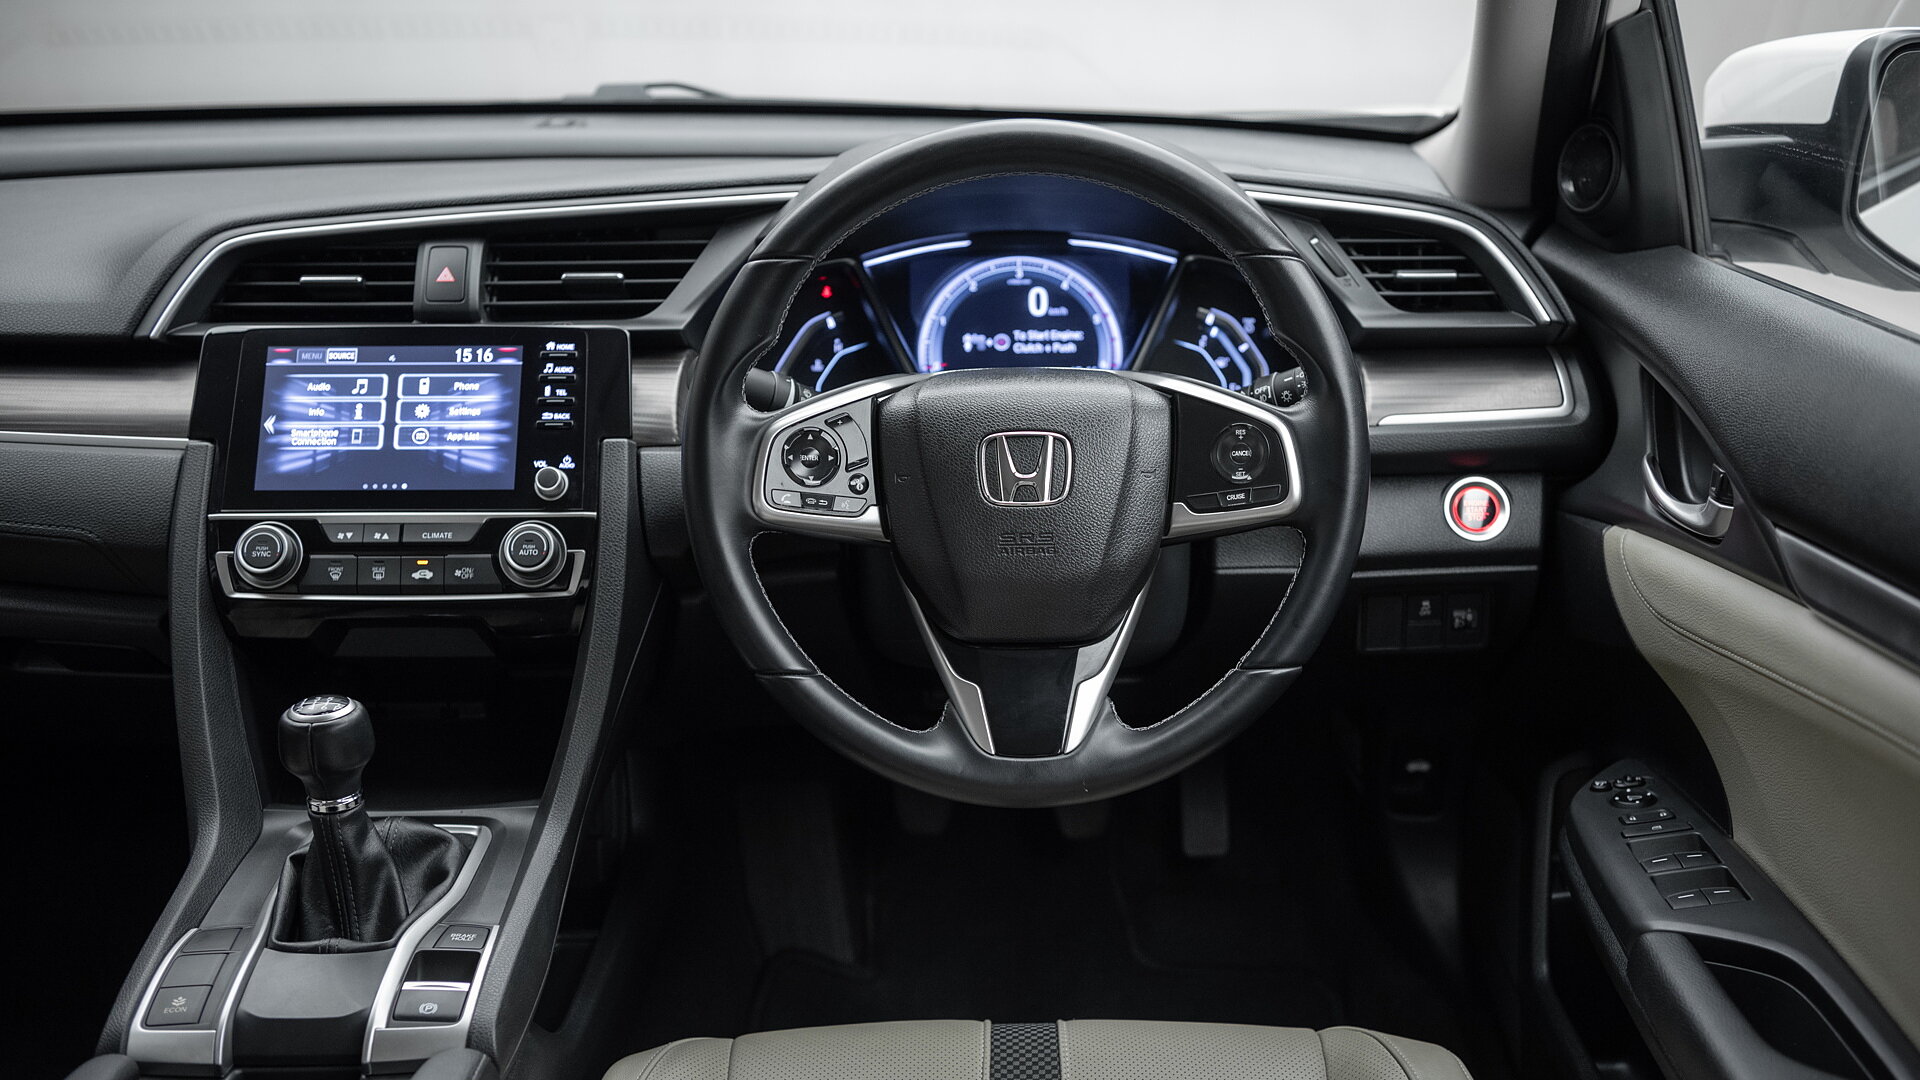 Civic Steering Wheel Image, Civic Photos in India - CarWale